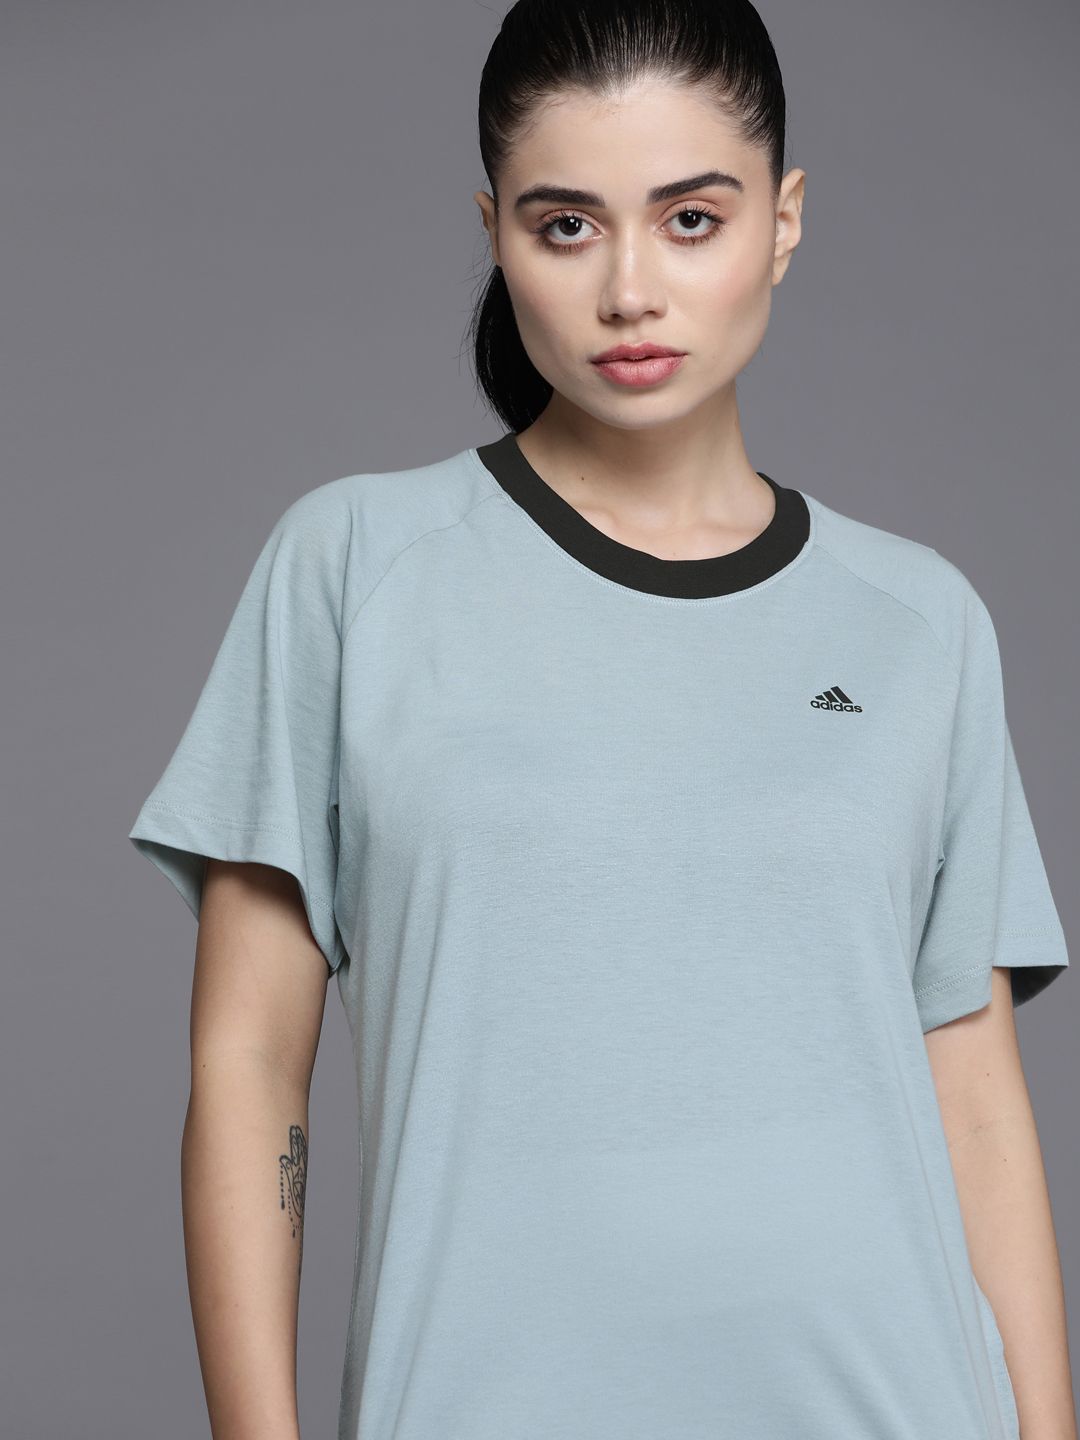 ADIDAS Women Grey With A Tinge Of Blue Solid T-shirt Price in India